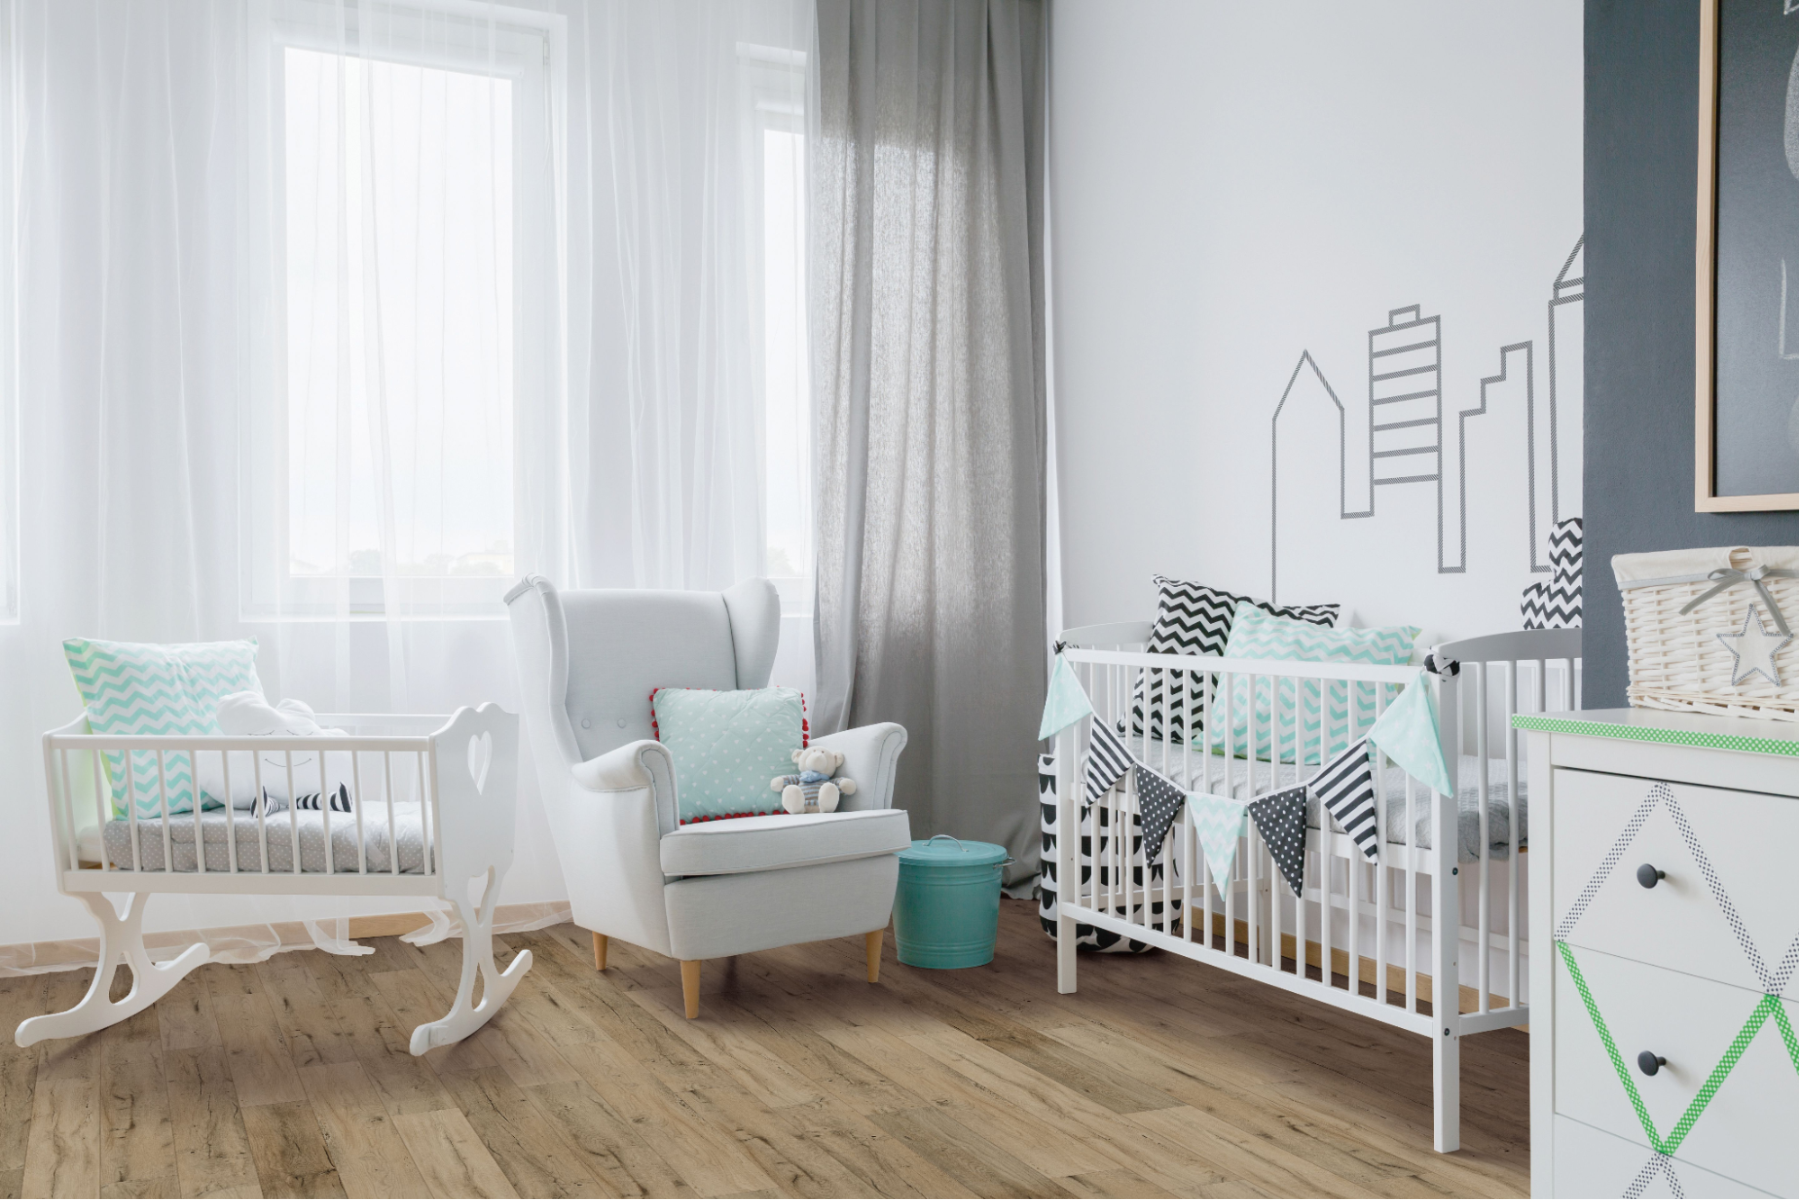 Nursery with wide plank timber flooring, white furniture and light cyan accents